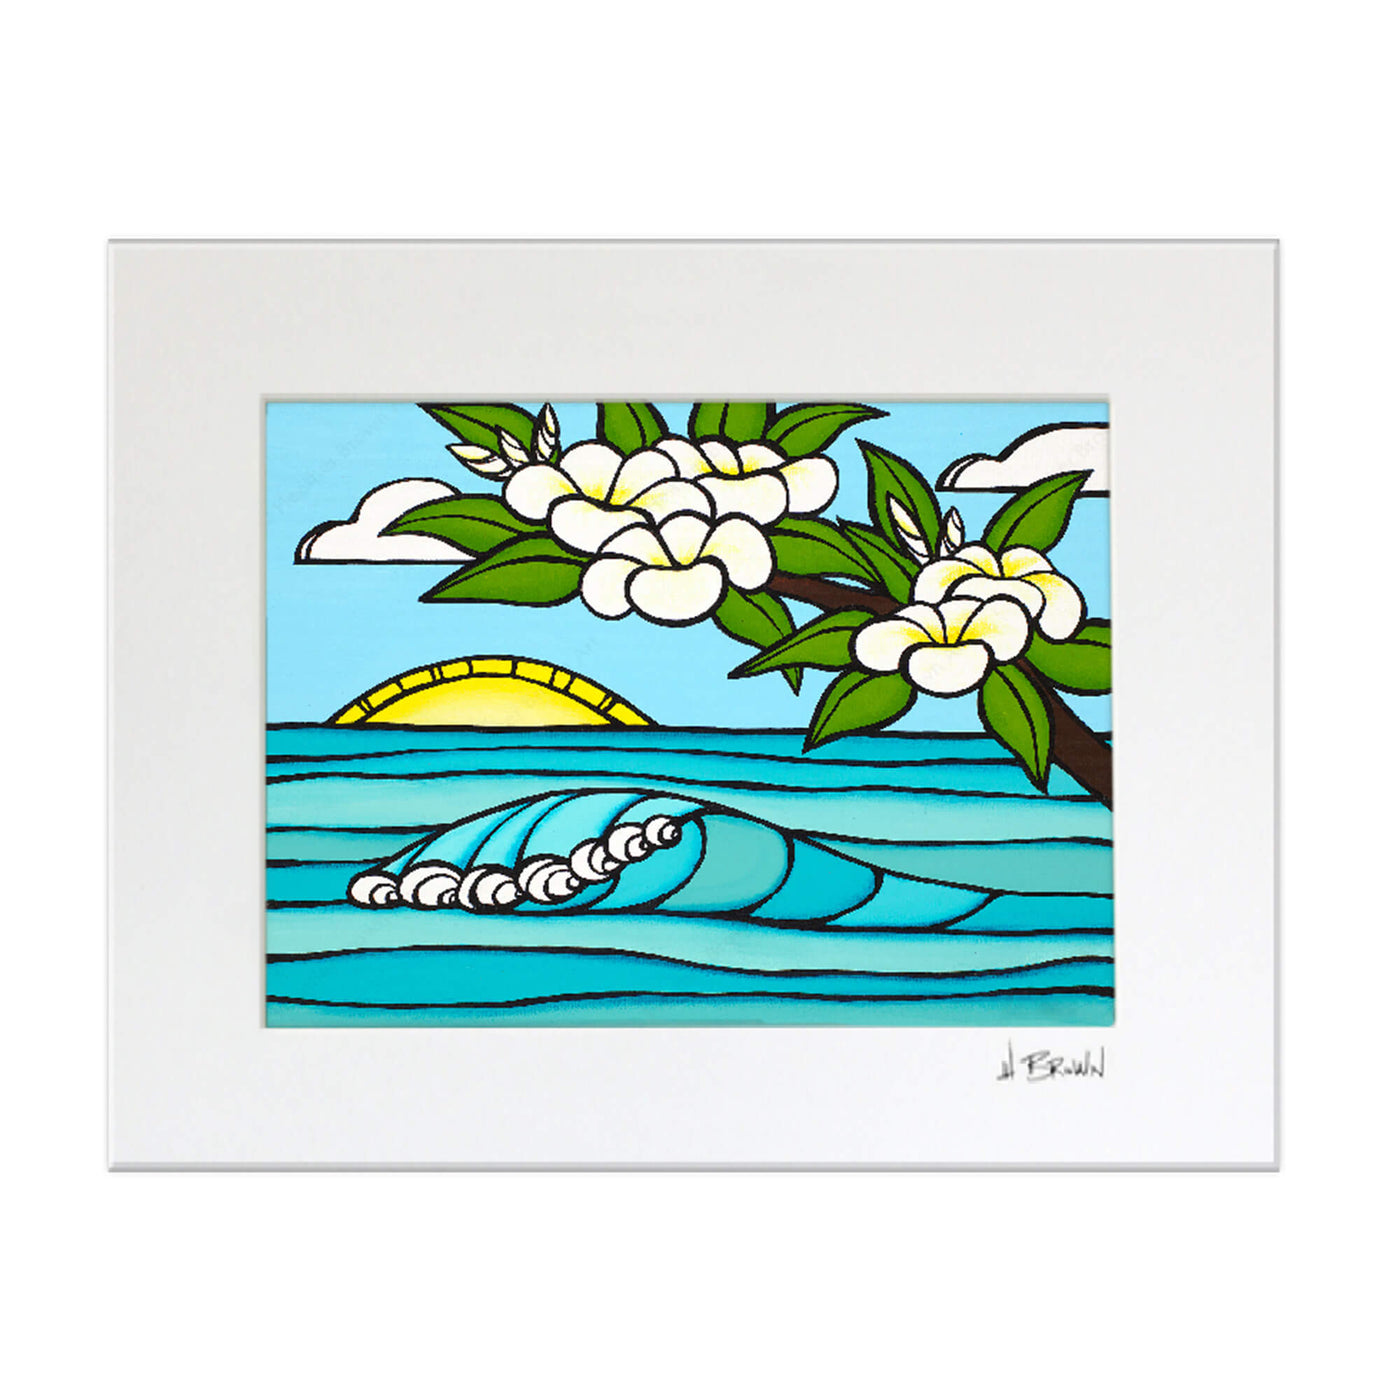 Unframed matted art print of a sunrise with rolling waves and plumeria flowers by Hawaii surf artist Heather Brown